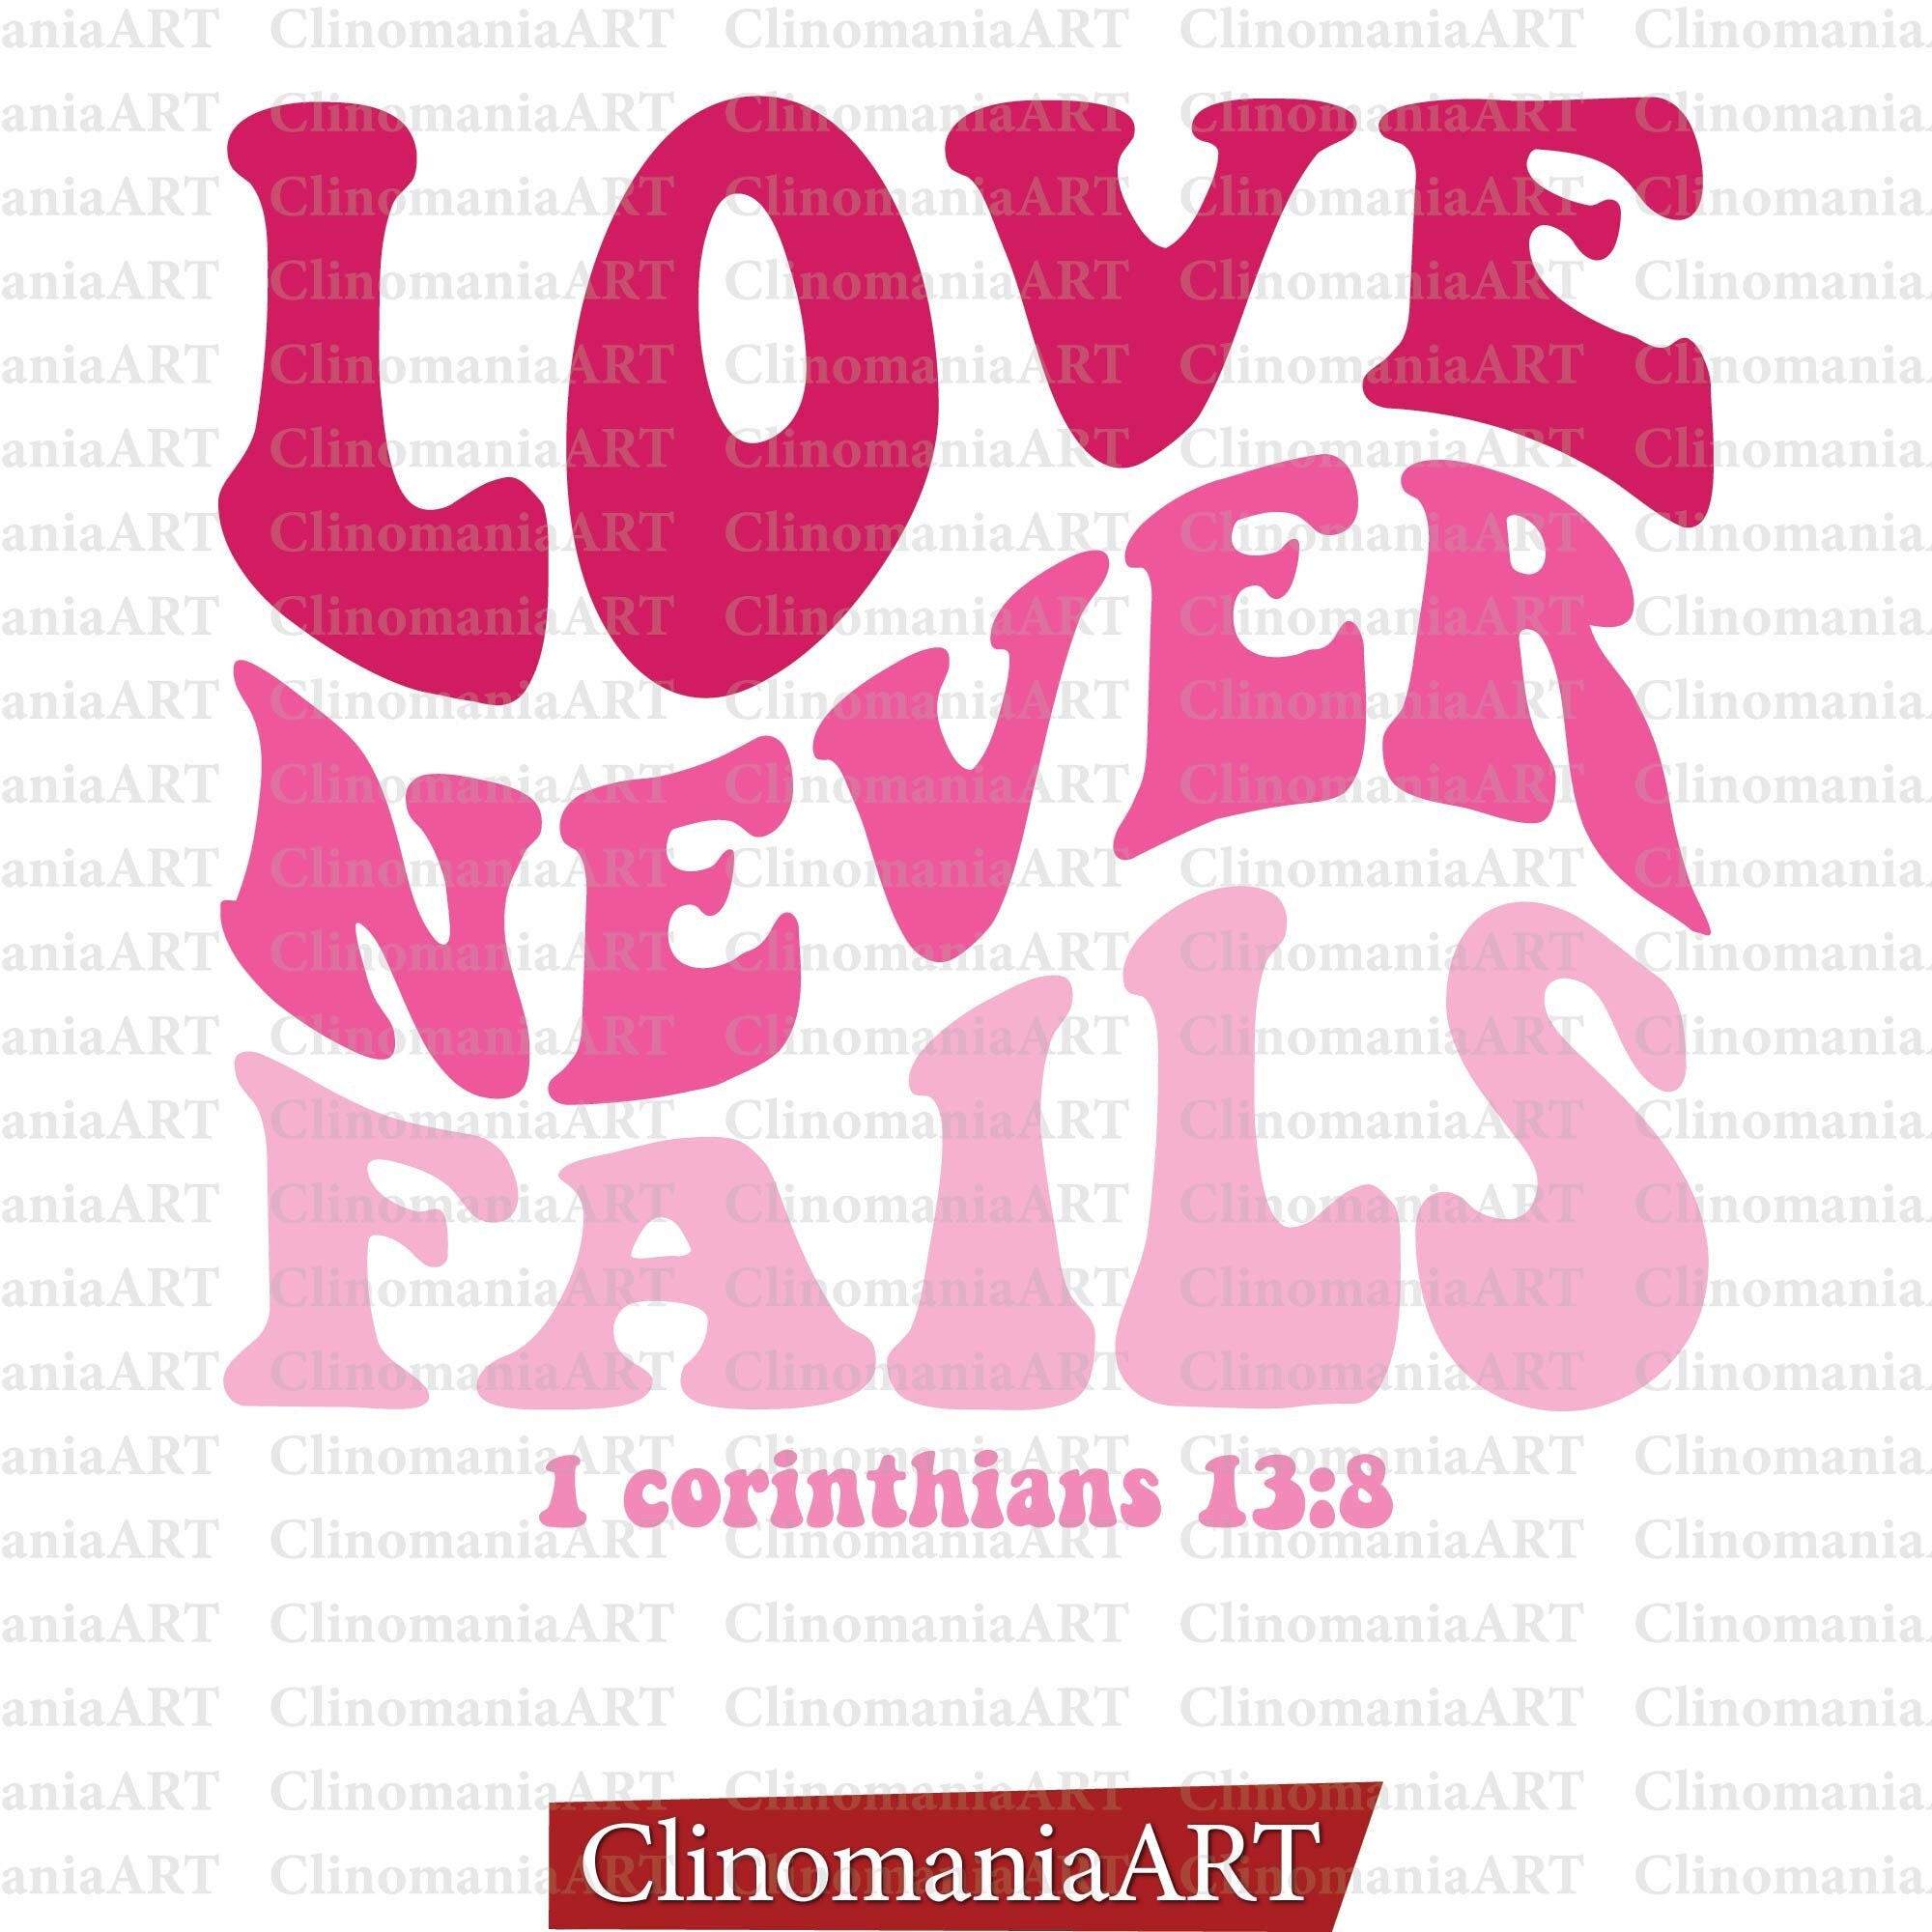 Your Love Never Fails - Lyrics Greeting Card for Sale by